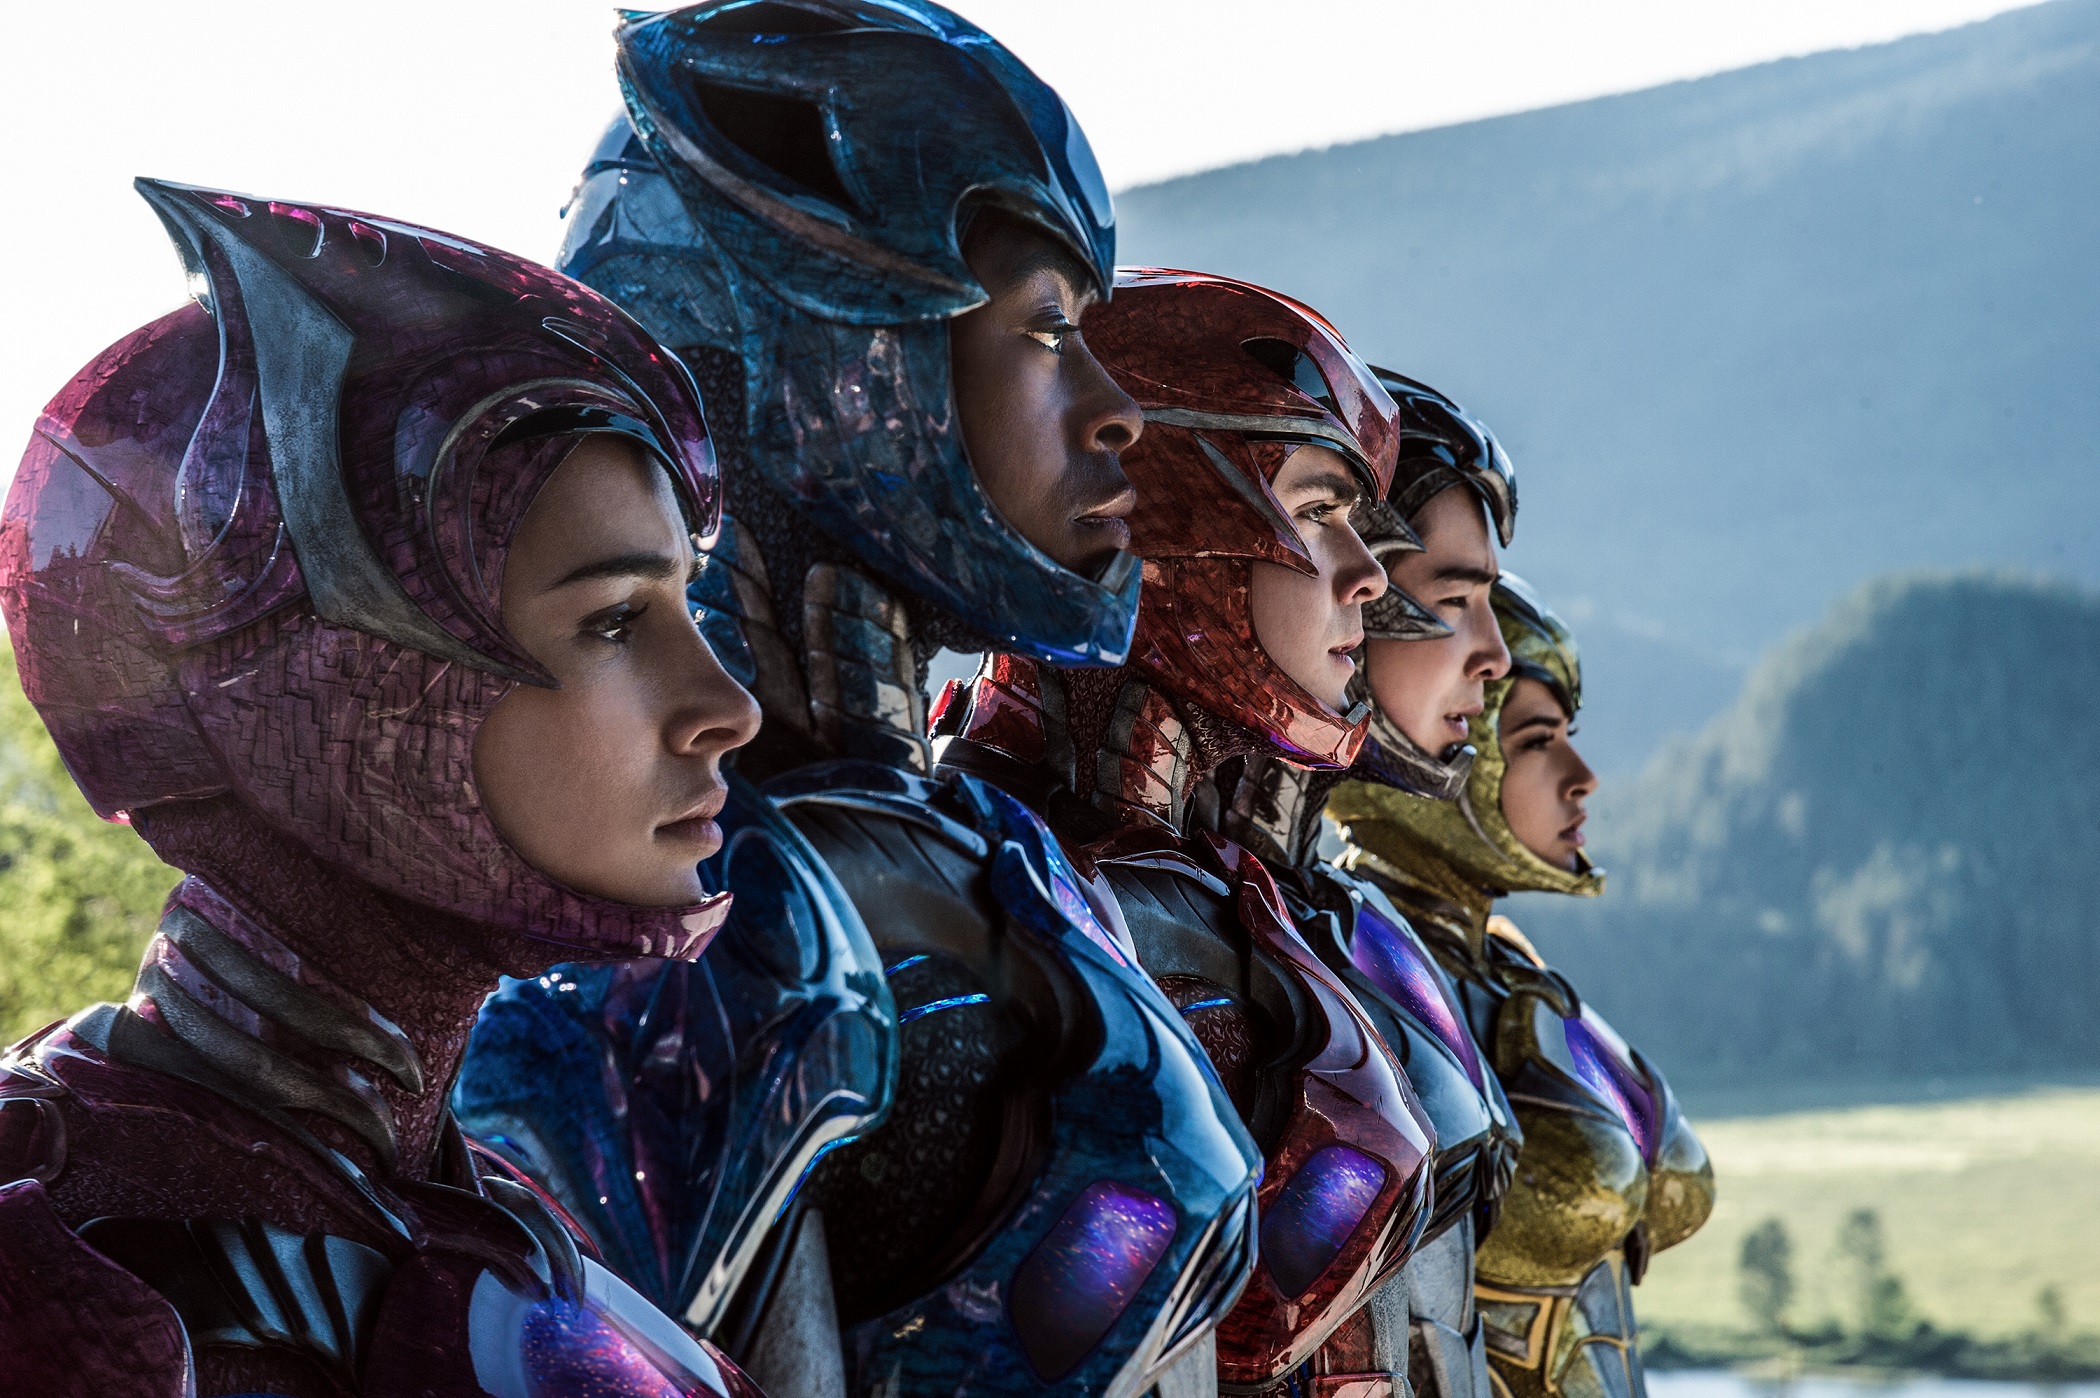 [CLOSED] Exclusive Gala Premiere Tickets For Power Rangers Movie To Be Won